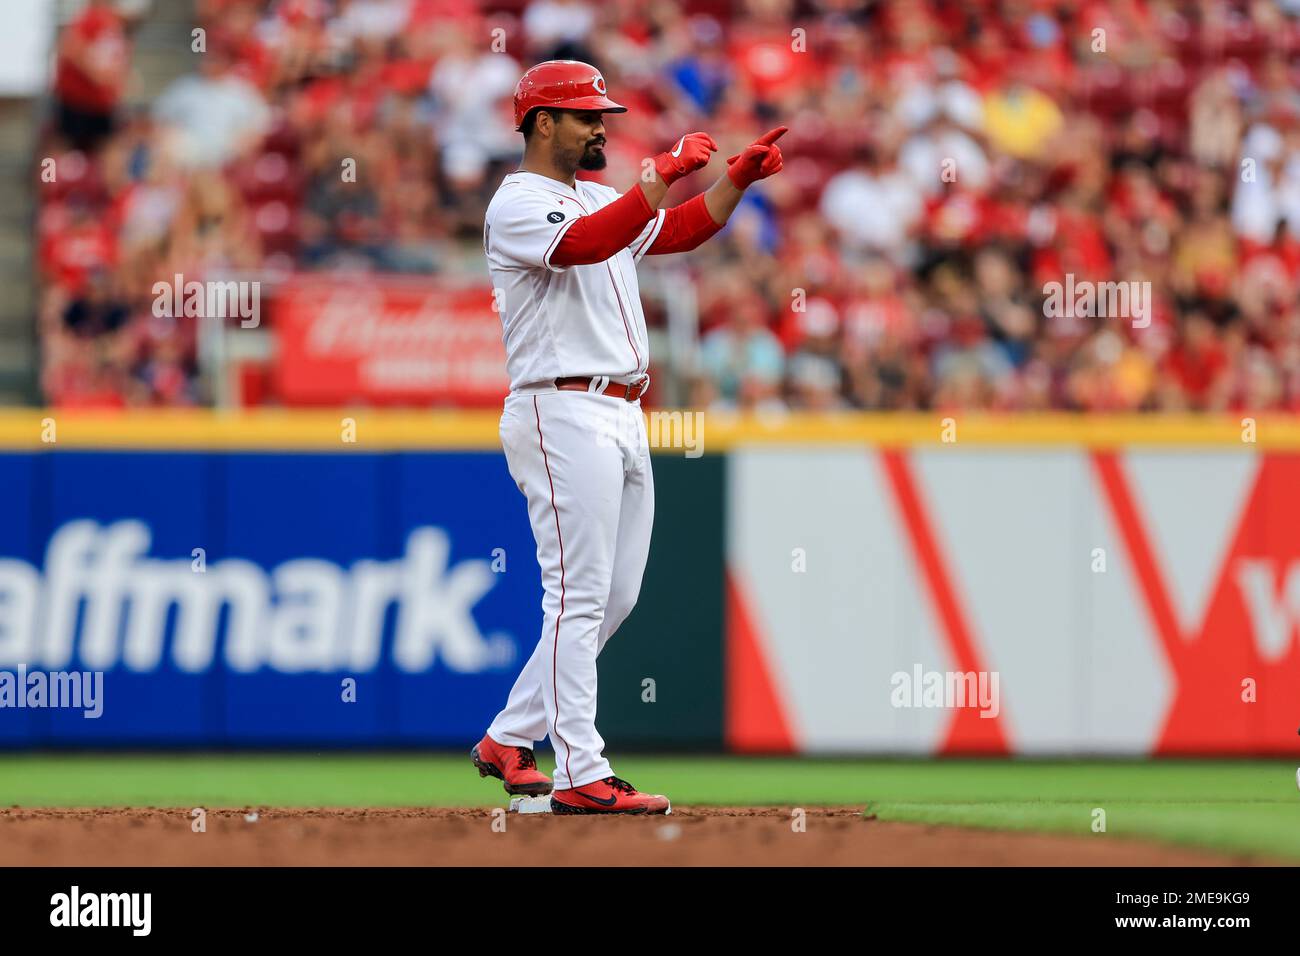 June 24, 2021 game: Reds 5, Braves 3